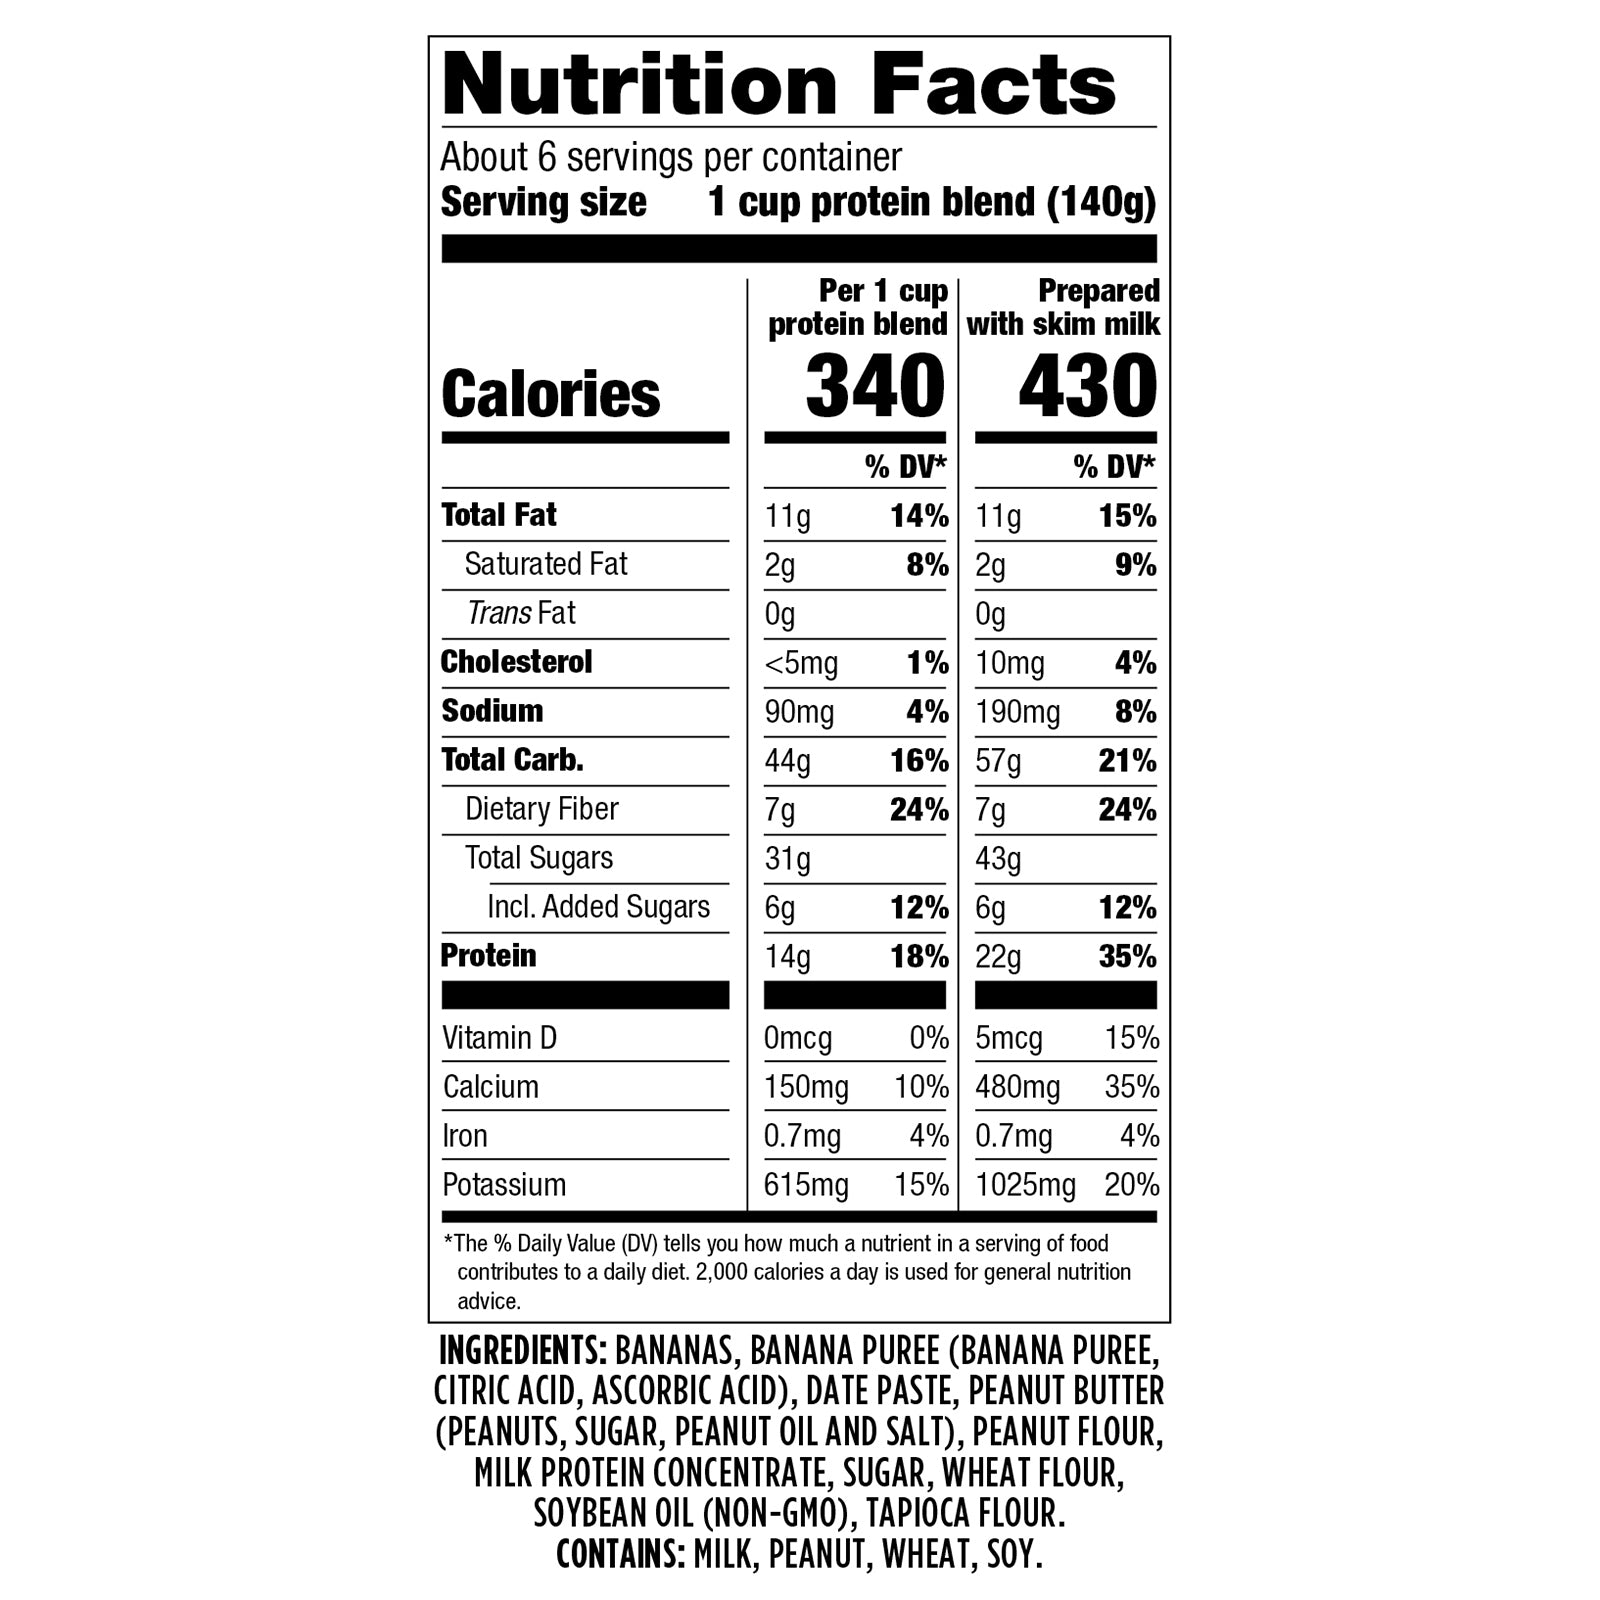 Wyman's Protein Blend - Banana Peanut Butter Nutritional Facts